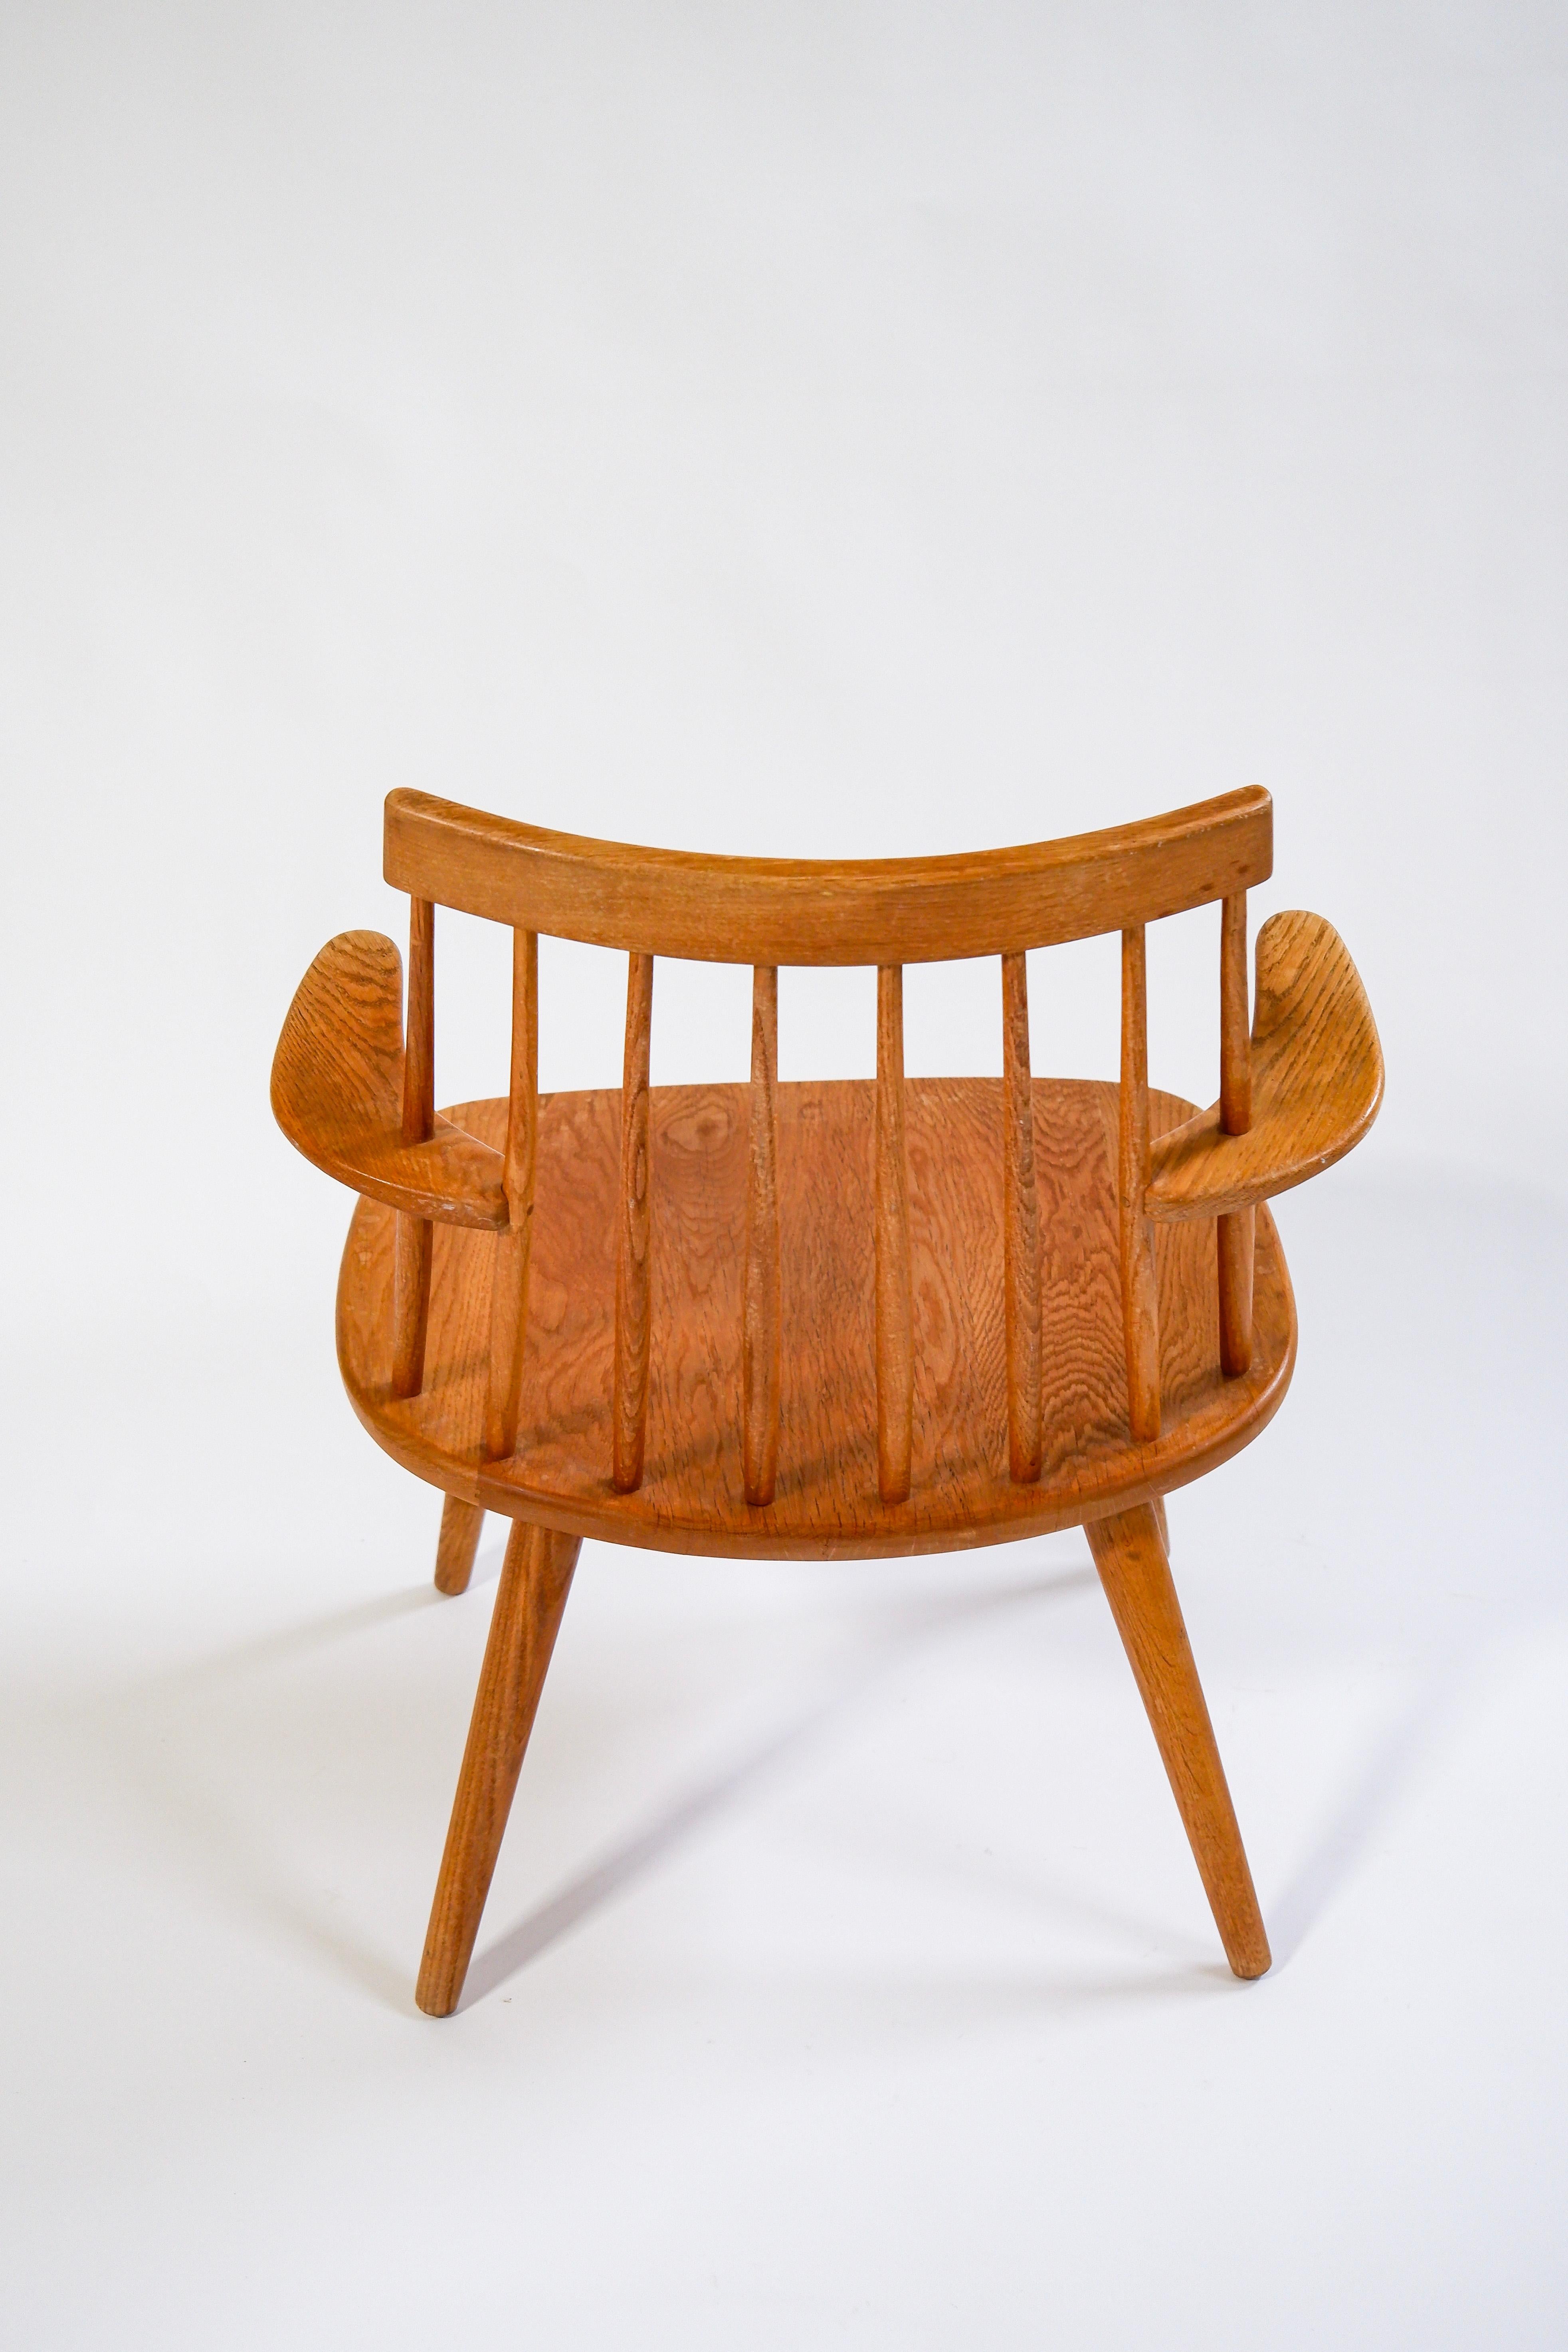 Yngve Ekström Arm Chair model Sibbo in solid oak designed in 1955 for Stolab AB in Sweden. Good overhall condition. Original cushion available. Yngve Ekström is one of the most influent designer of his time during the second part of the century in